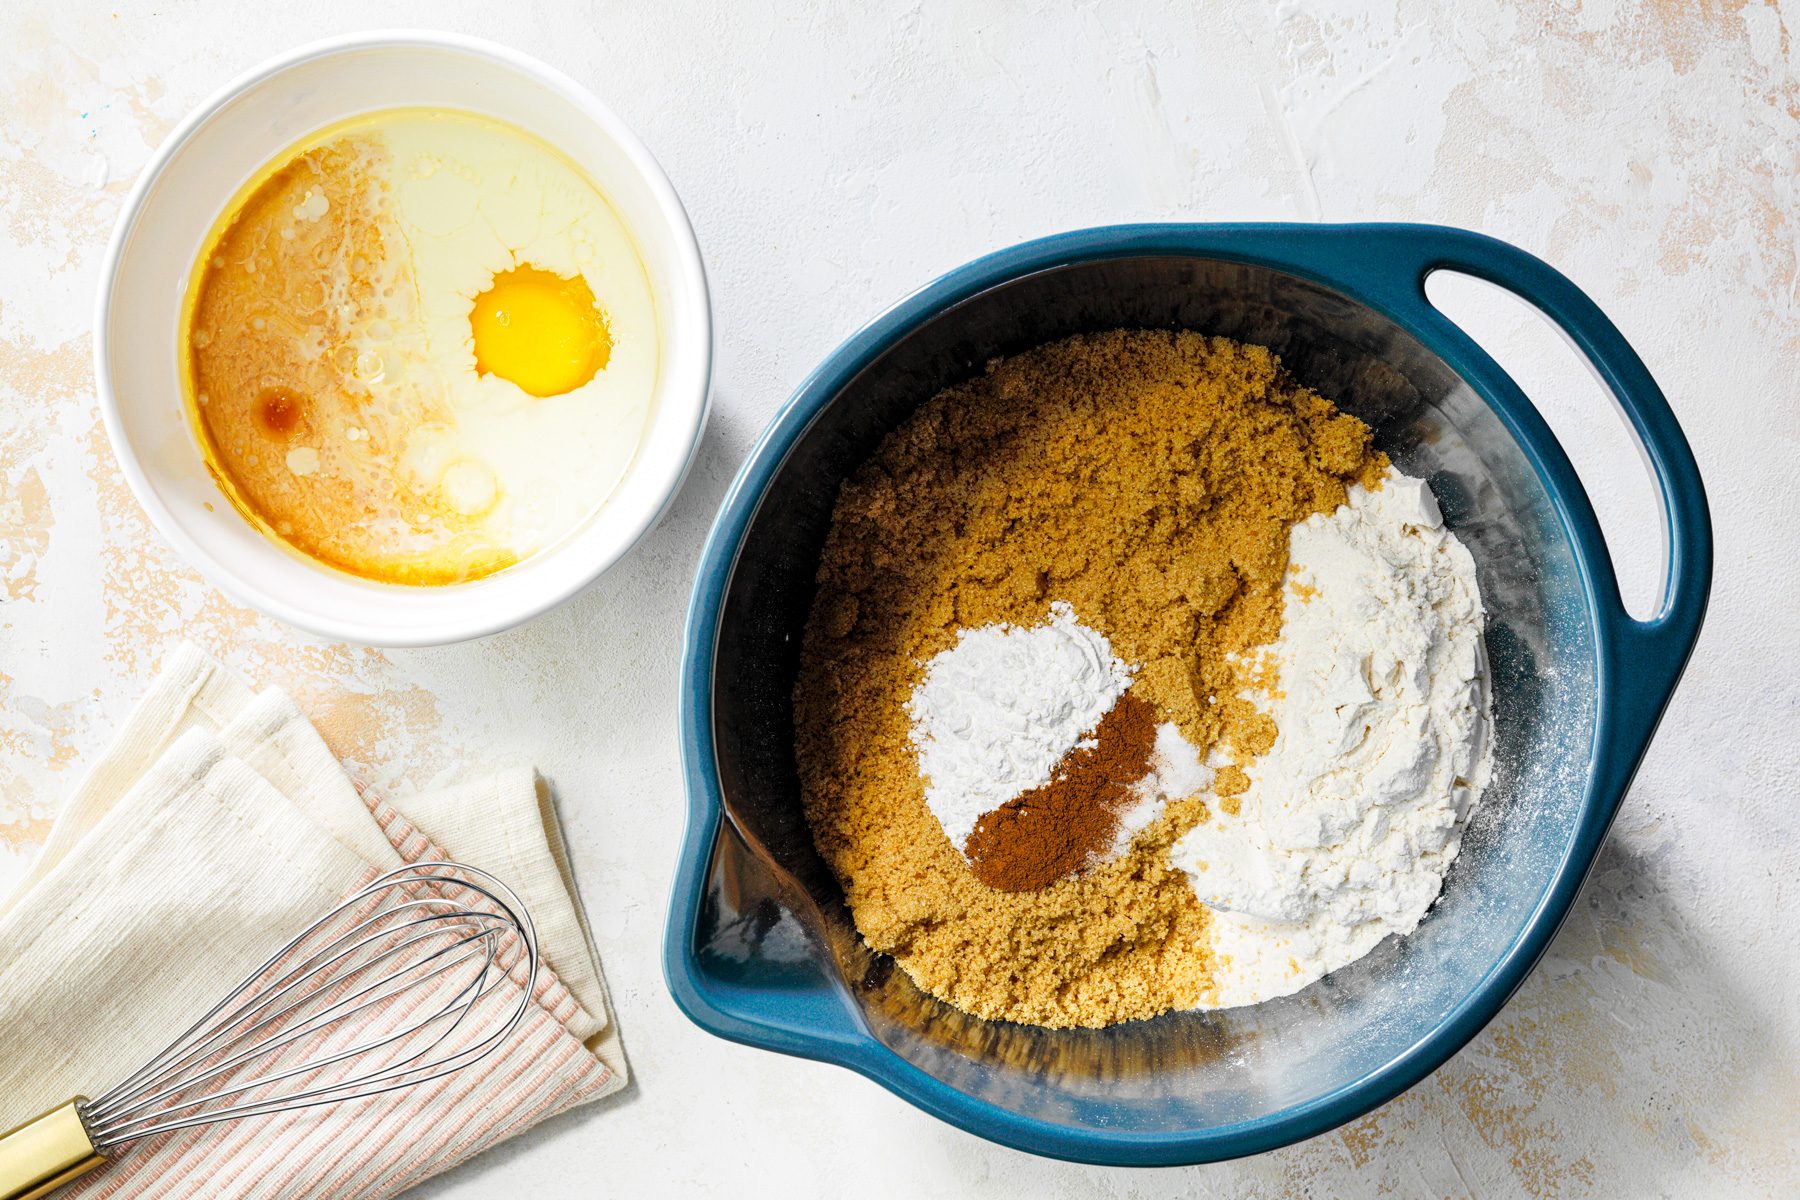 Two separate bowls with eggs and dry ingredients